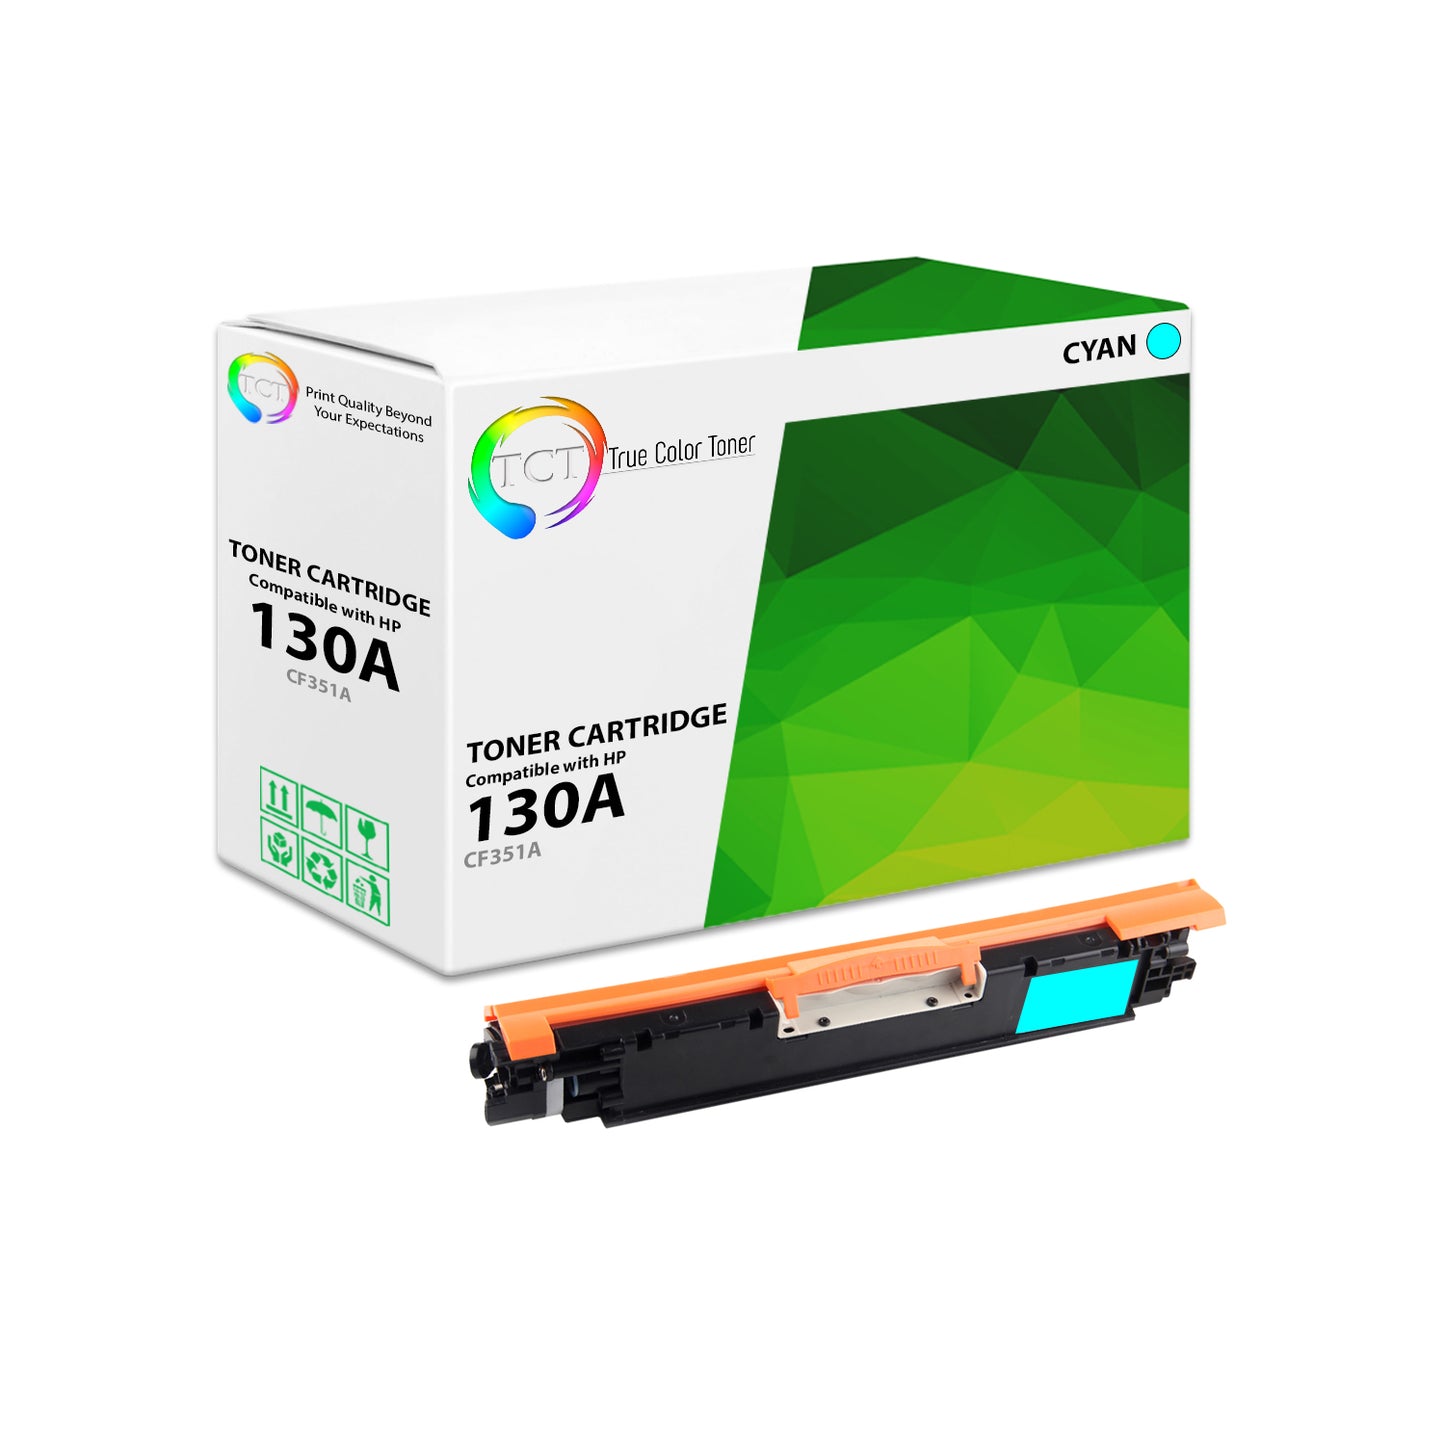 TCT Compatible Toner Cartridge Replacement for the HP 130A Series - 1 Pack Cyan